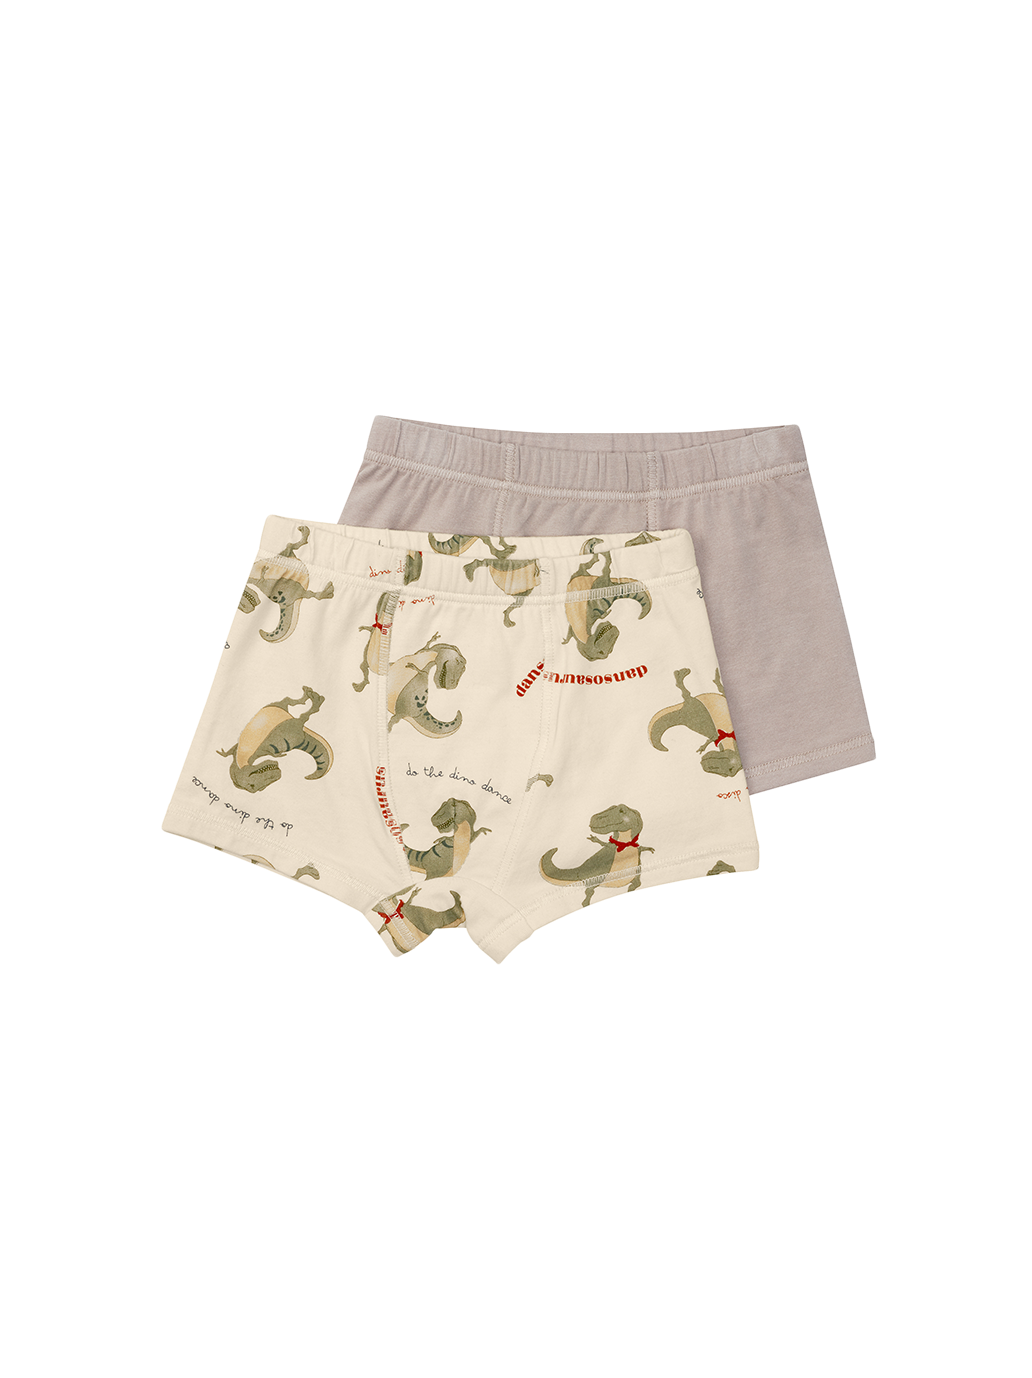 a set of cotton boxers for a boy